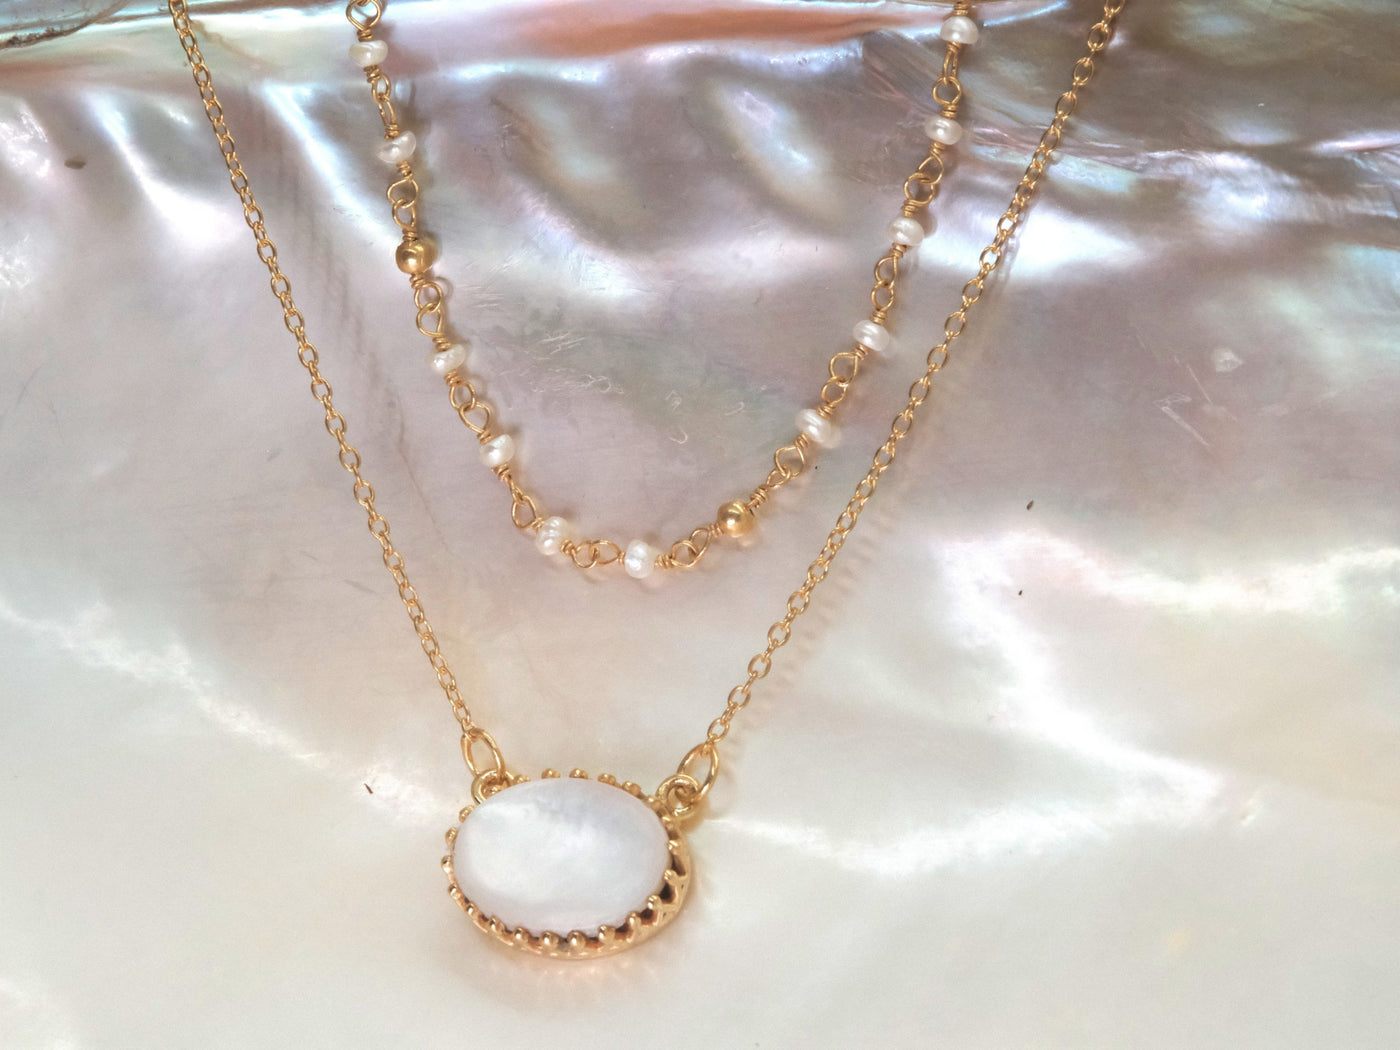 Malika necklace with mother of pearl